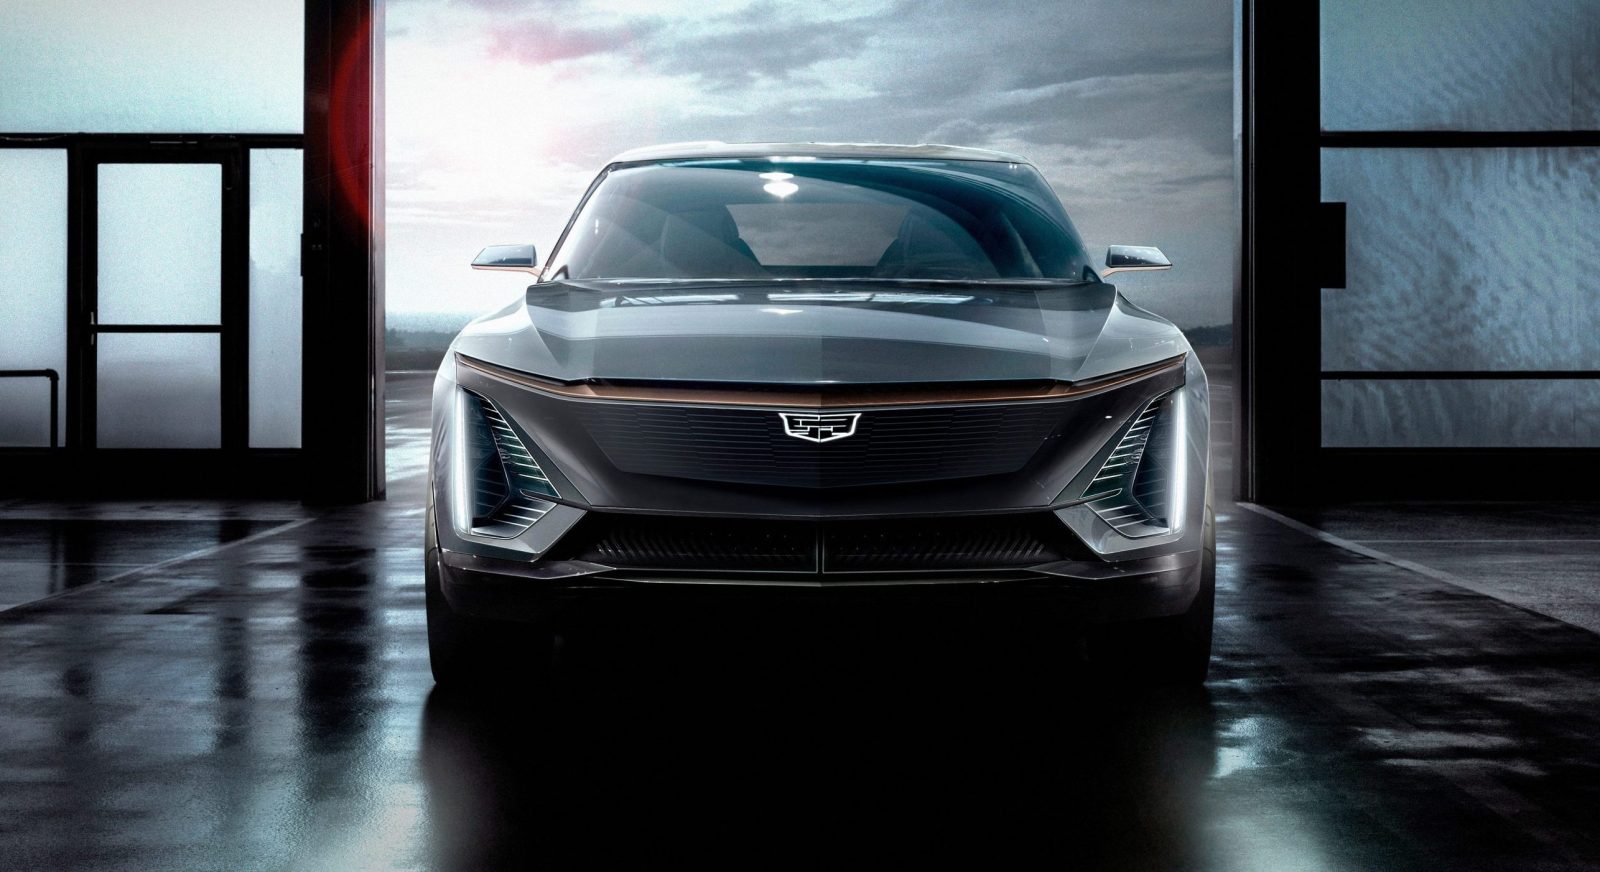 Cadillac reveals images of the brand's first EV, built on GM's "BEV3